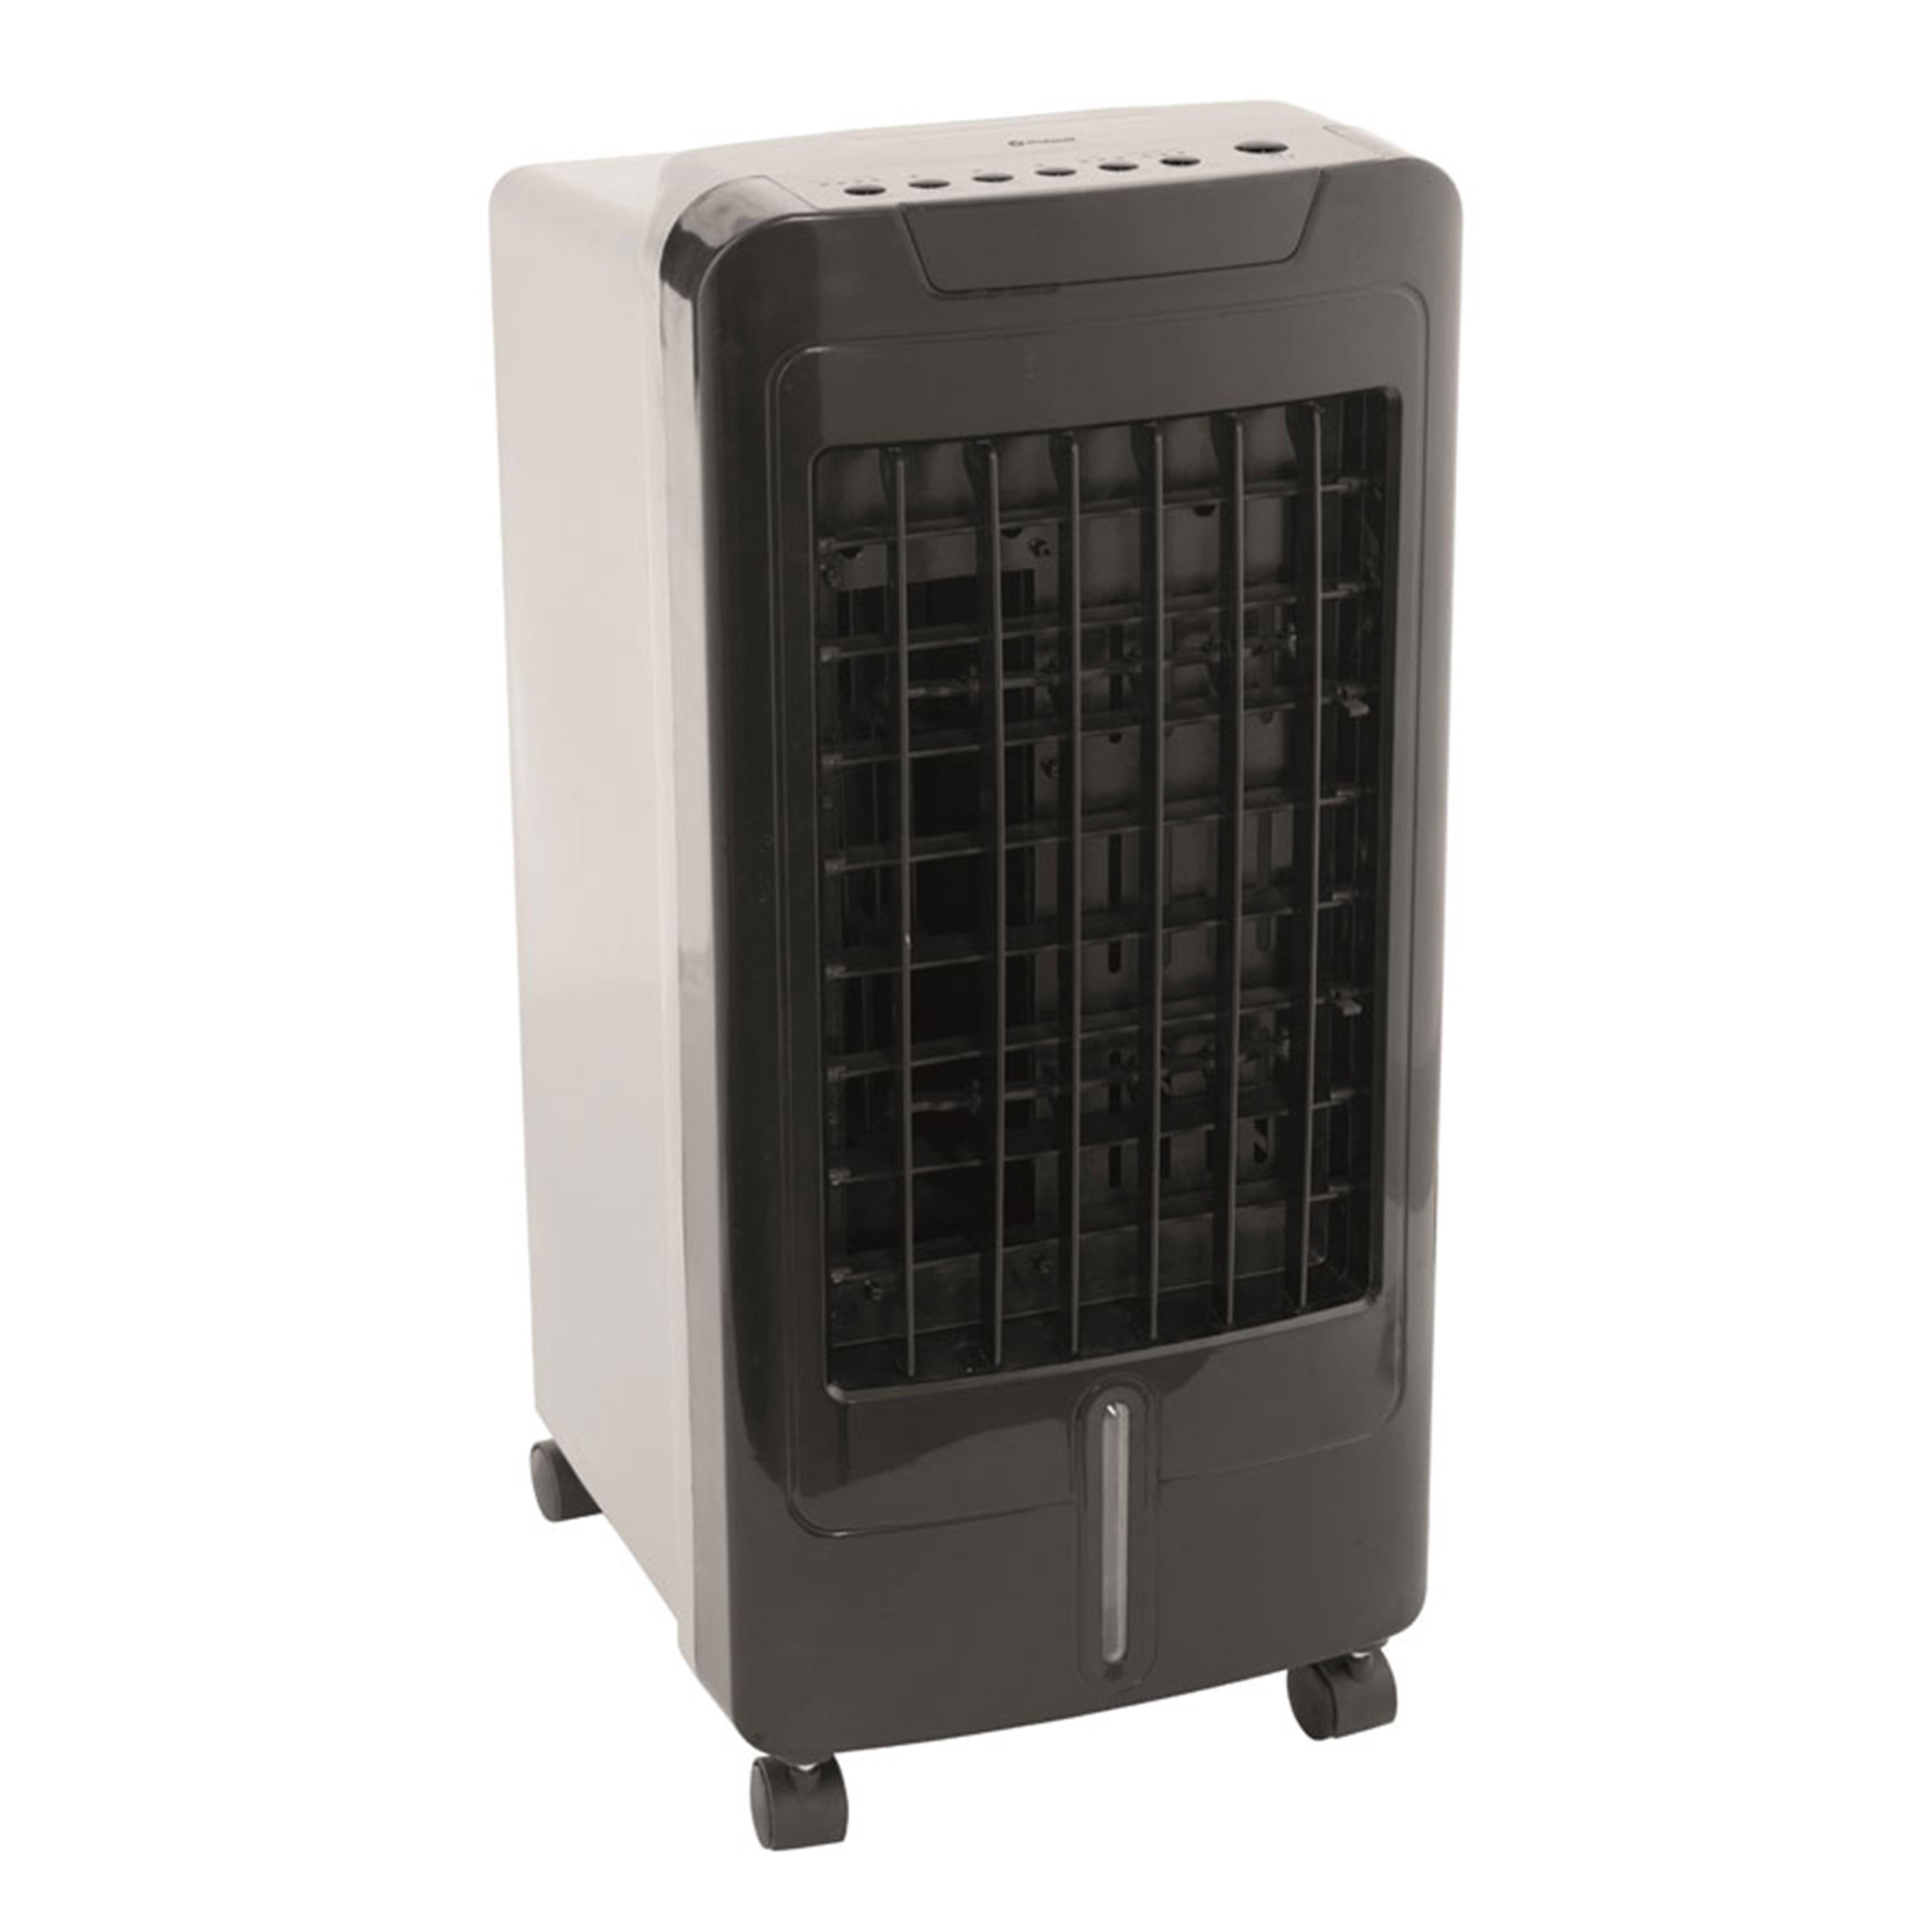 Outwell CALETA AIR CONDITION UK Review